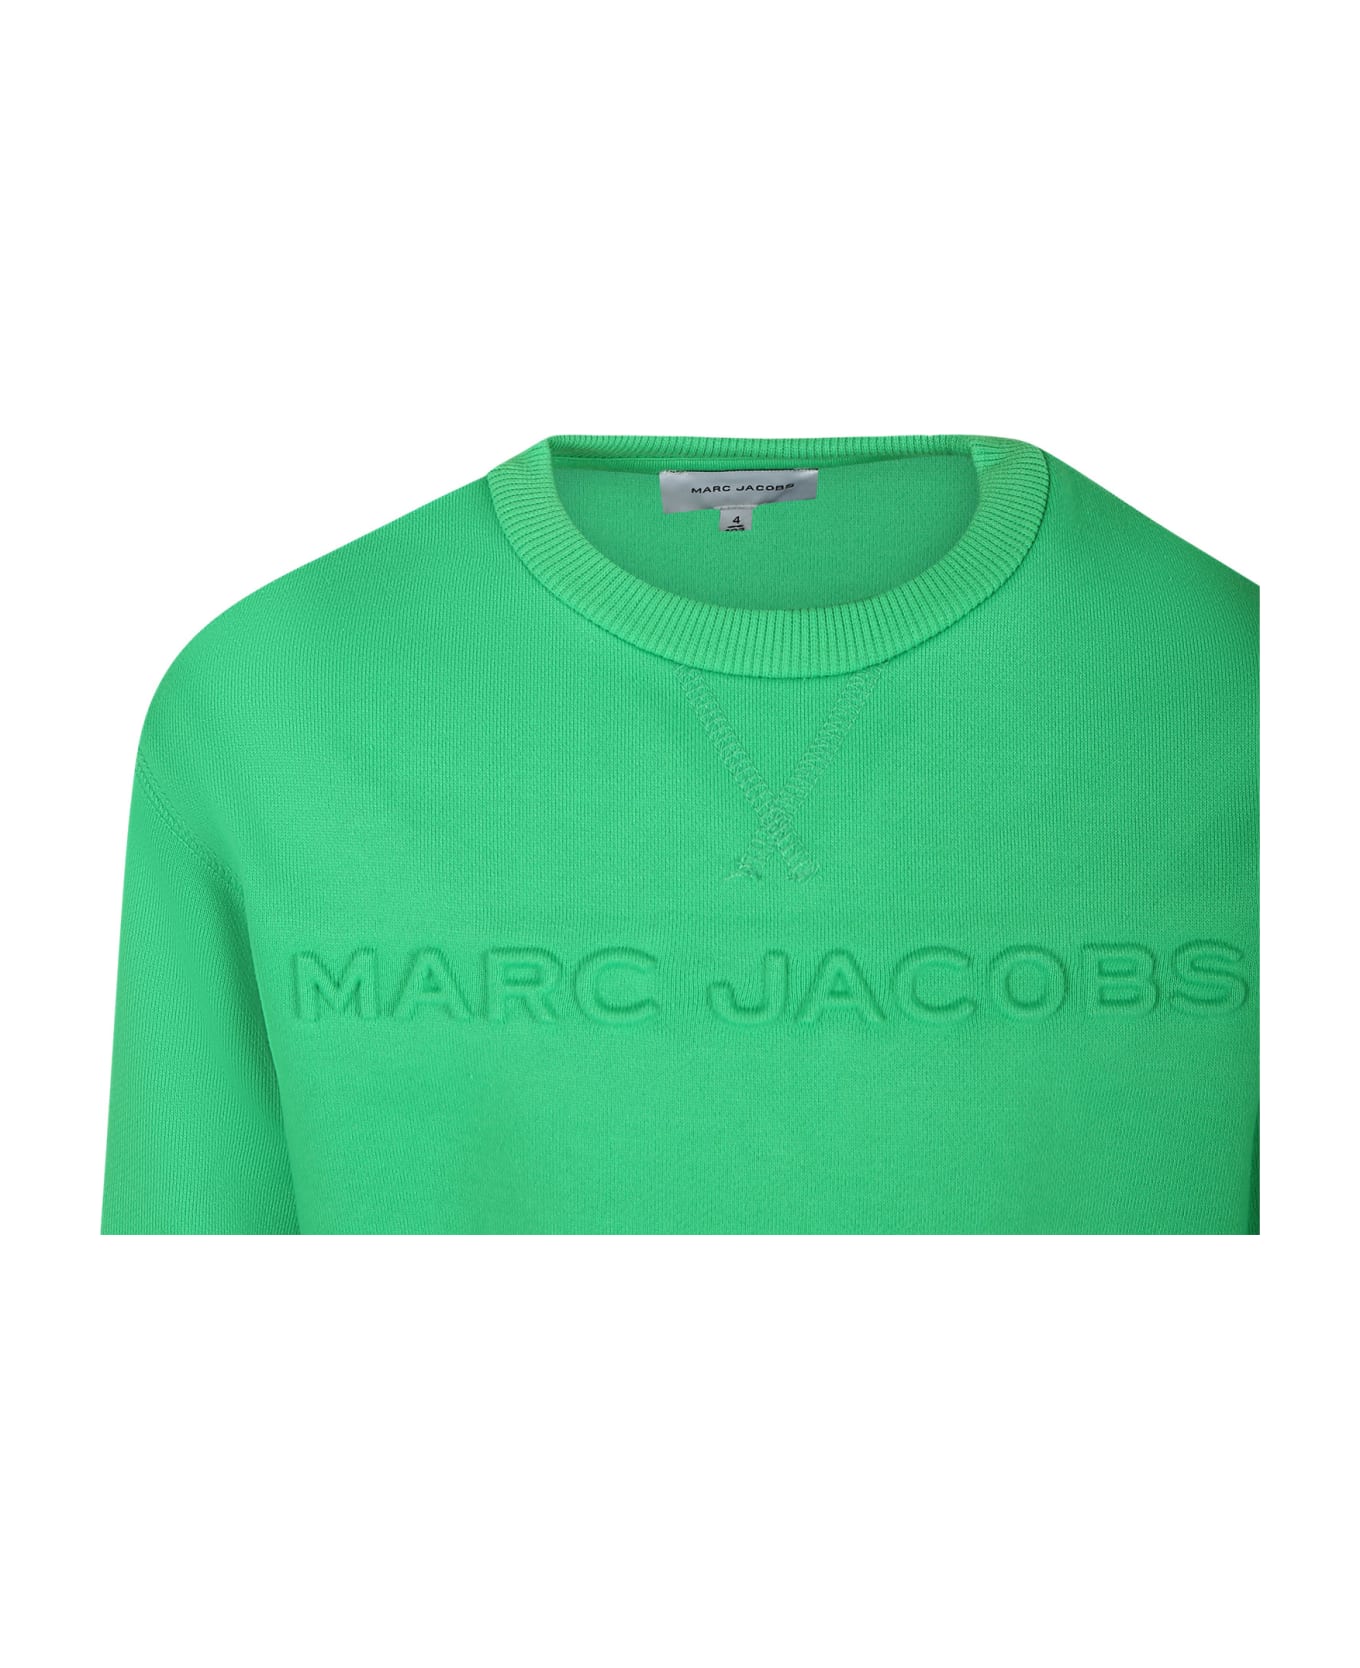 Marc Jacobs Green Sweatshirt For Kids With Logo - Green